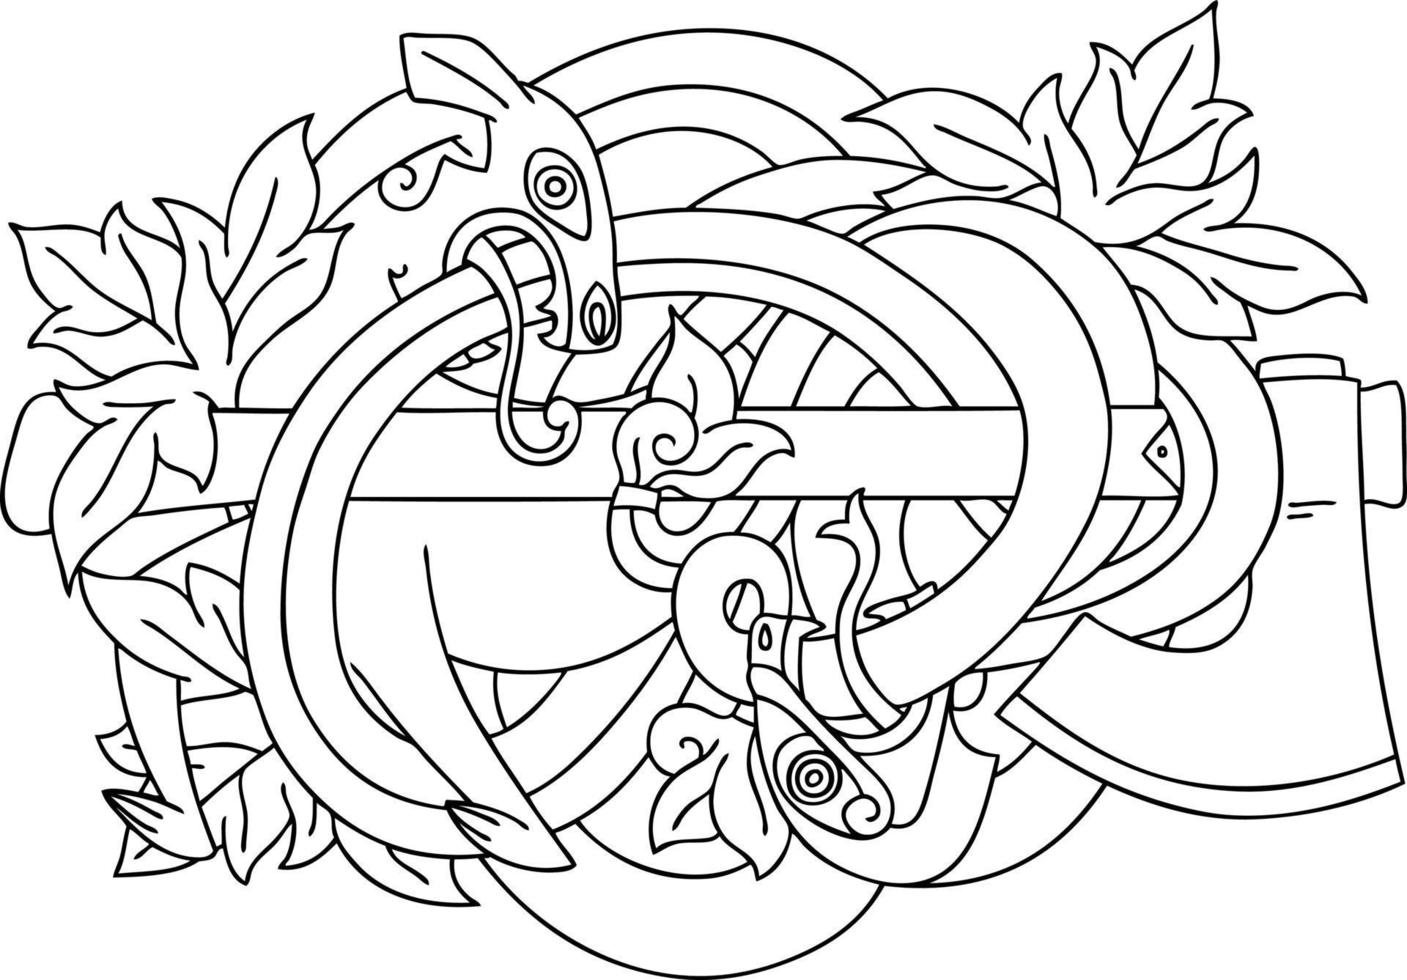 tattoo in black line style of medieval carving vector